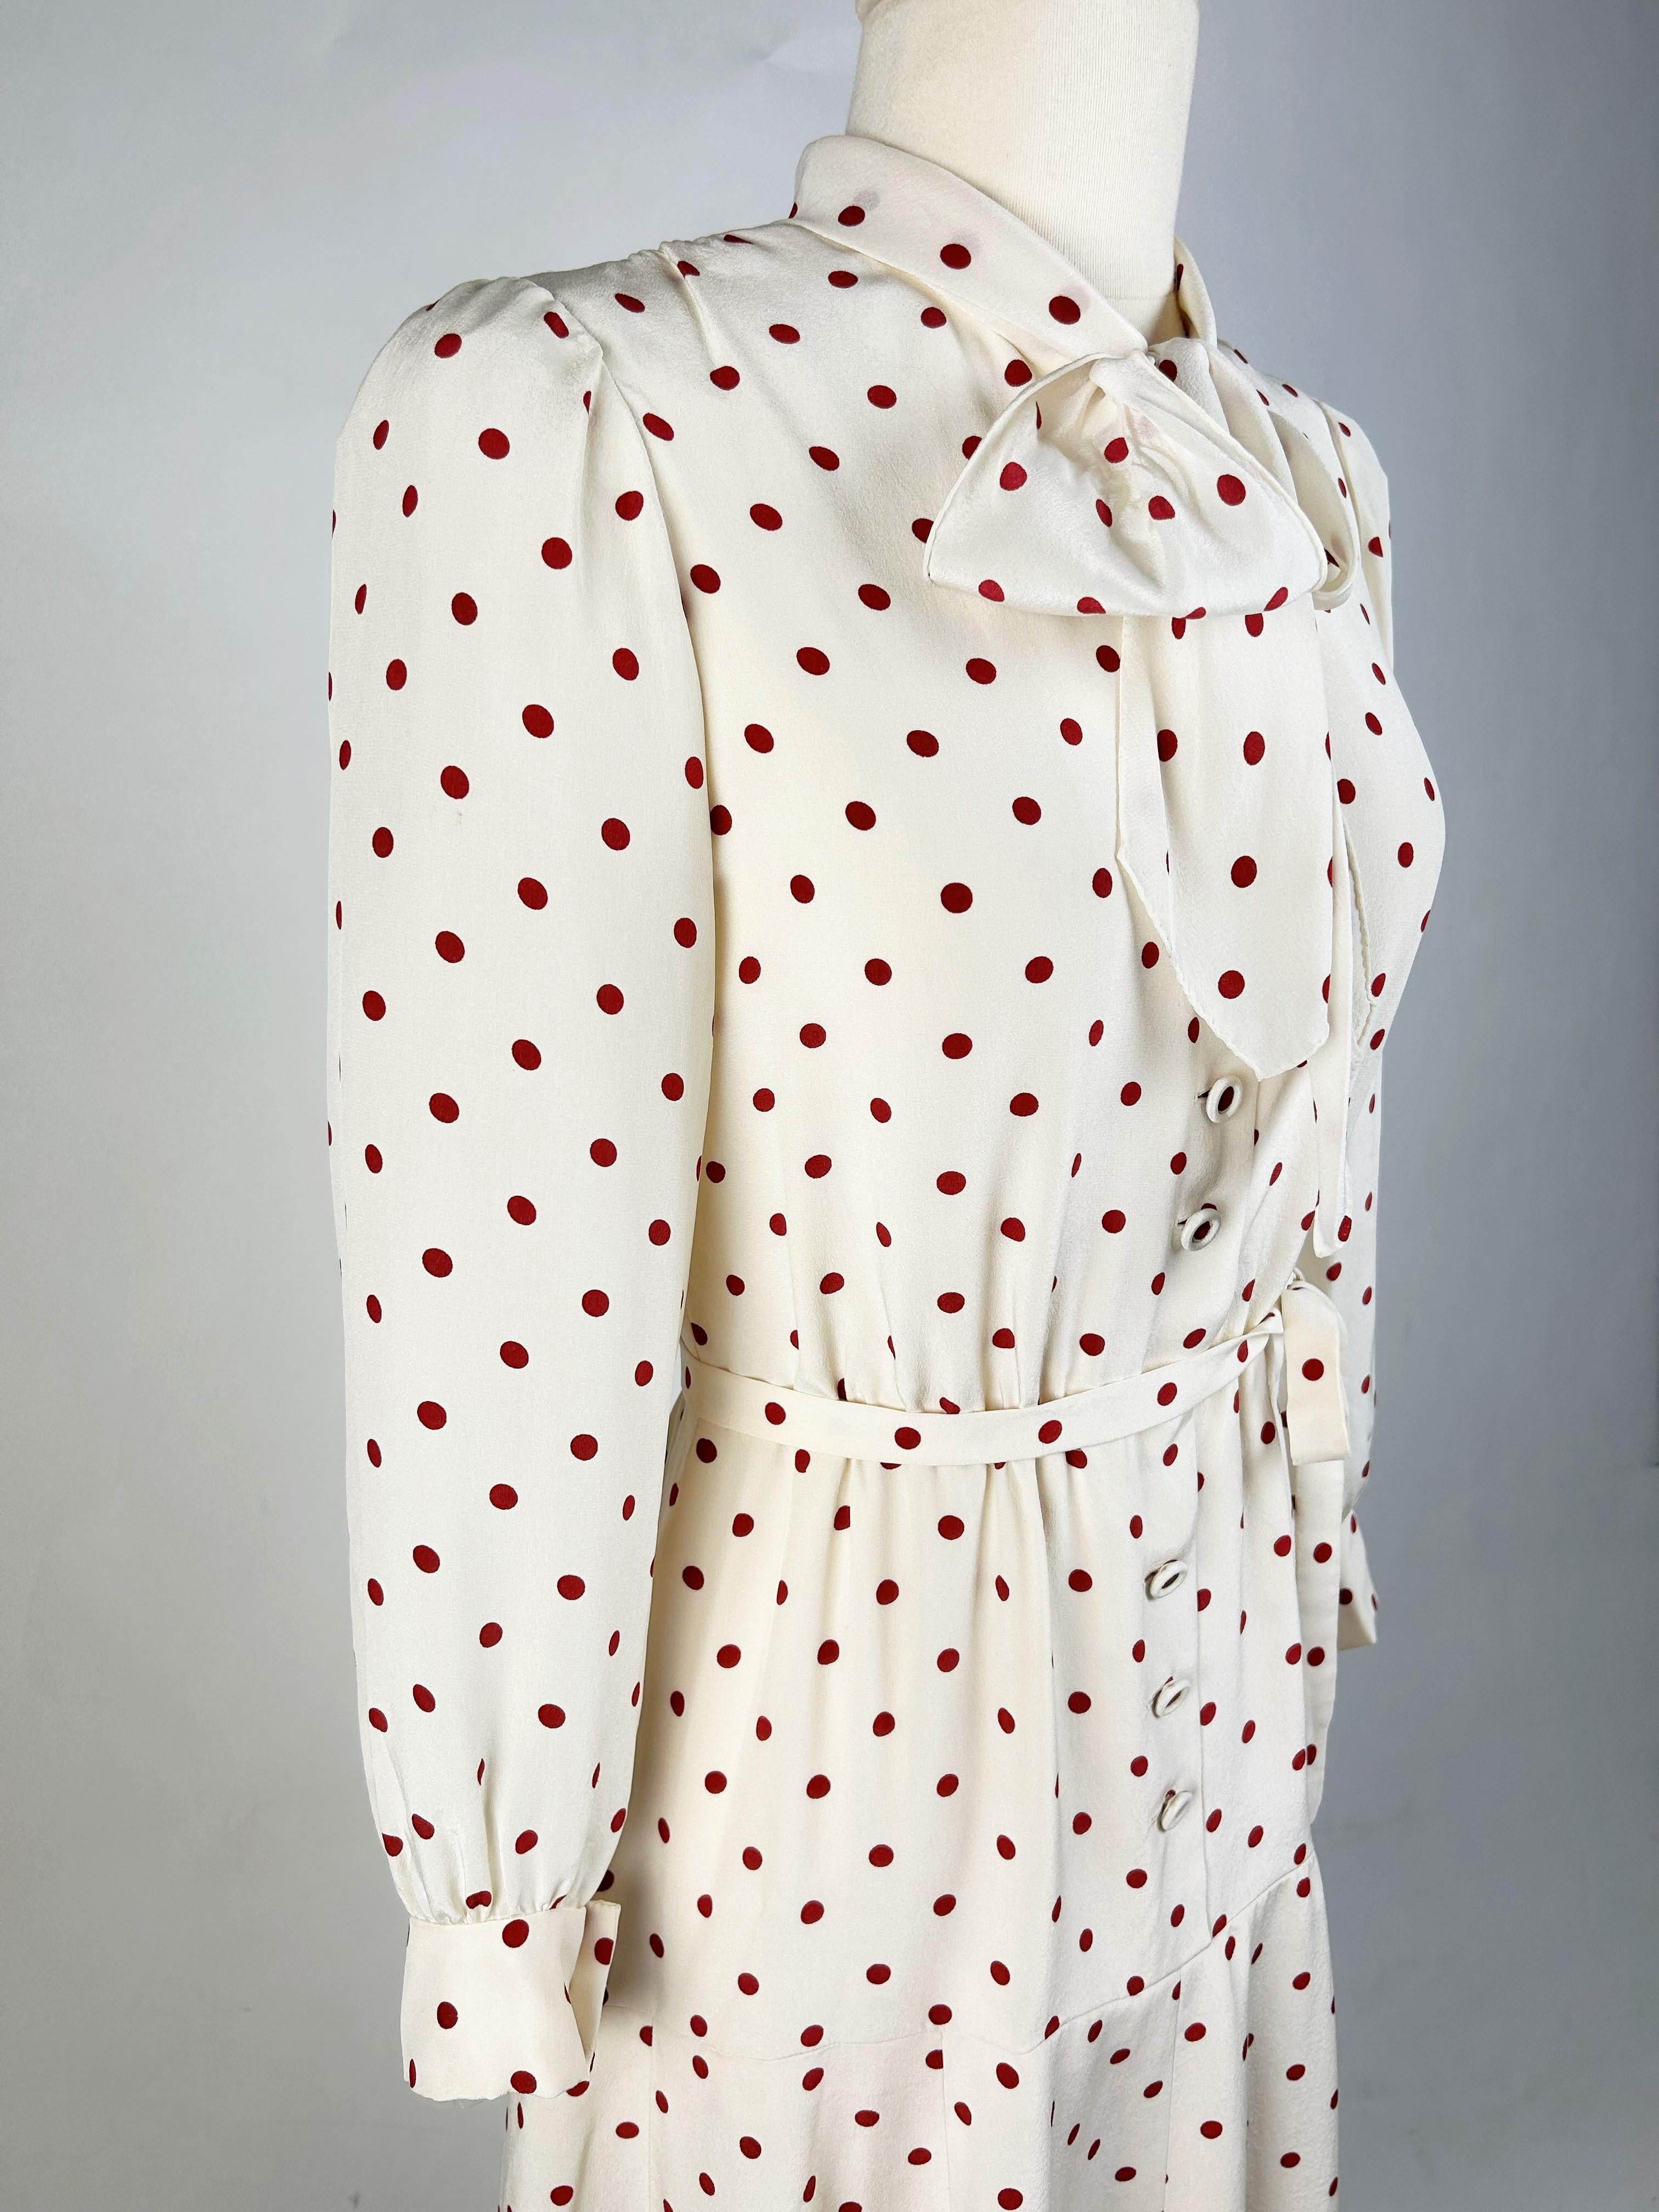 A Polka Dots crepe cocktail dress by Chanel Haute Couture numbered 59644 C. 1975 For Sale 7